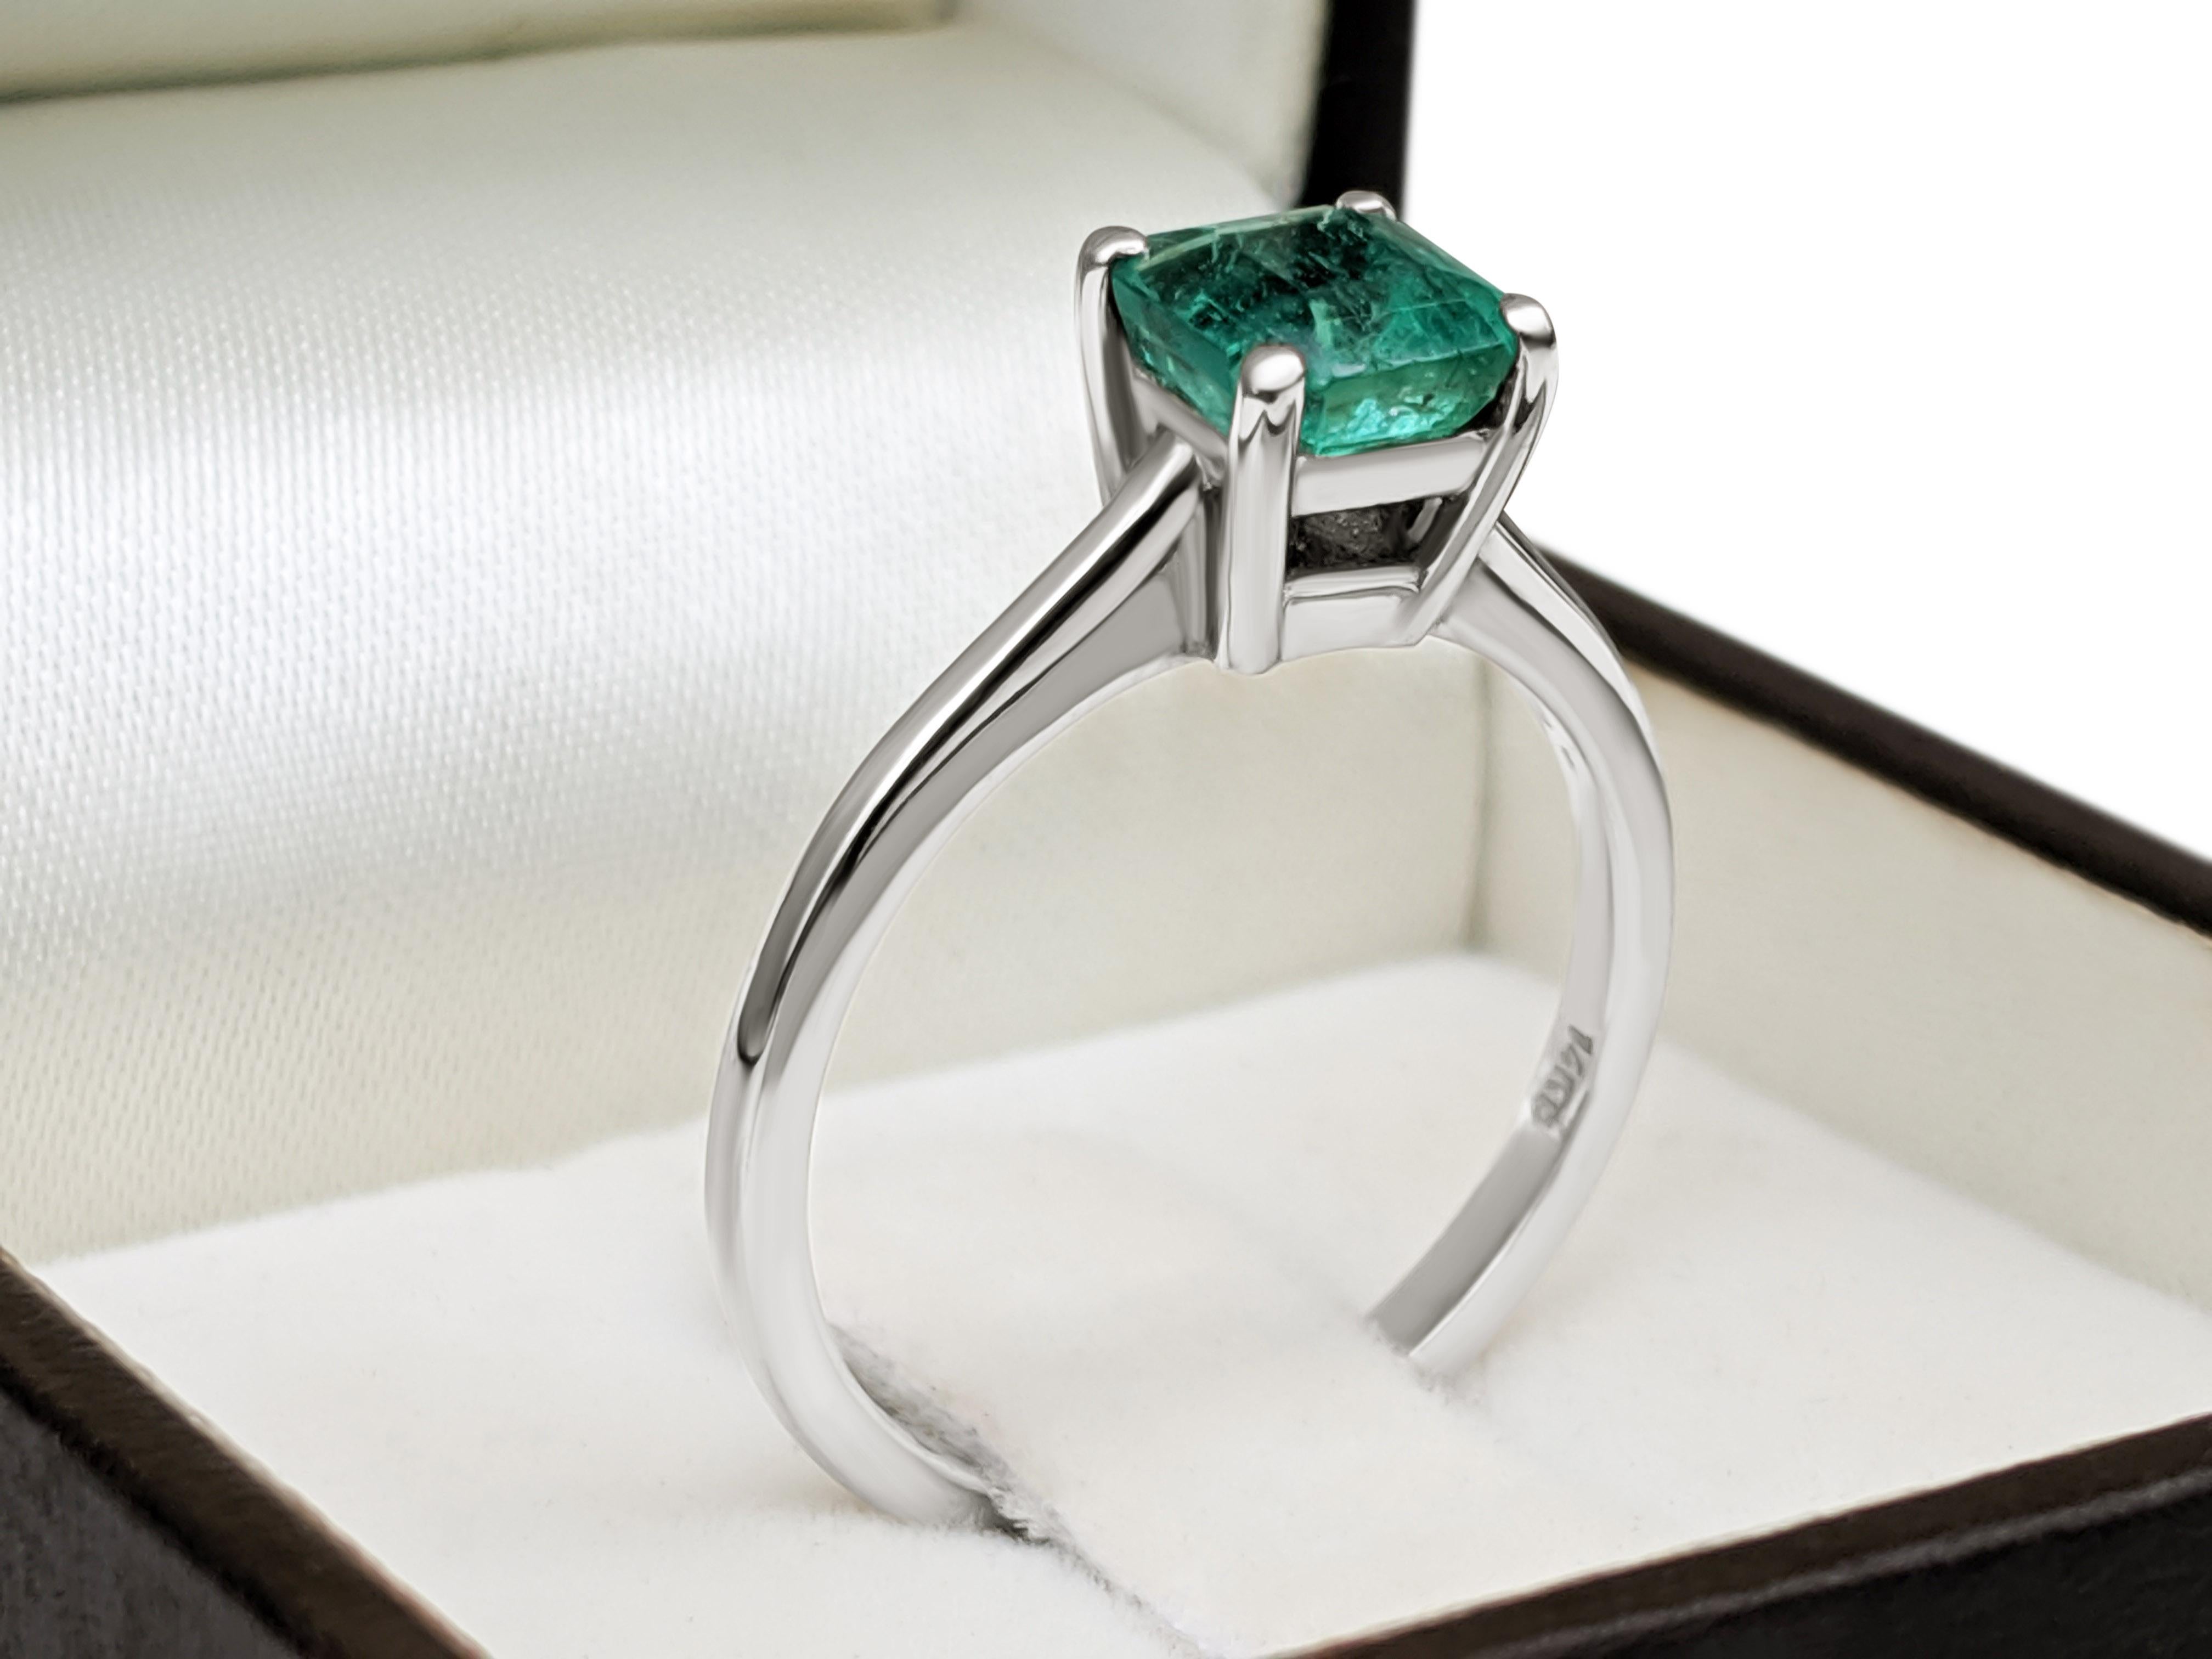 Ring can be resized free of charge prior to shipping out.
Ring Size: 53 EU / 16 IT / 7 1/2 US

Center Natural Emerald:
Weight: 1.06 ct
Colour: Green
Shape: Asscher Cut

Item ships from Israeli Diamonds Exchange, customers are responsible for any